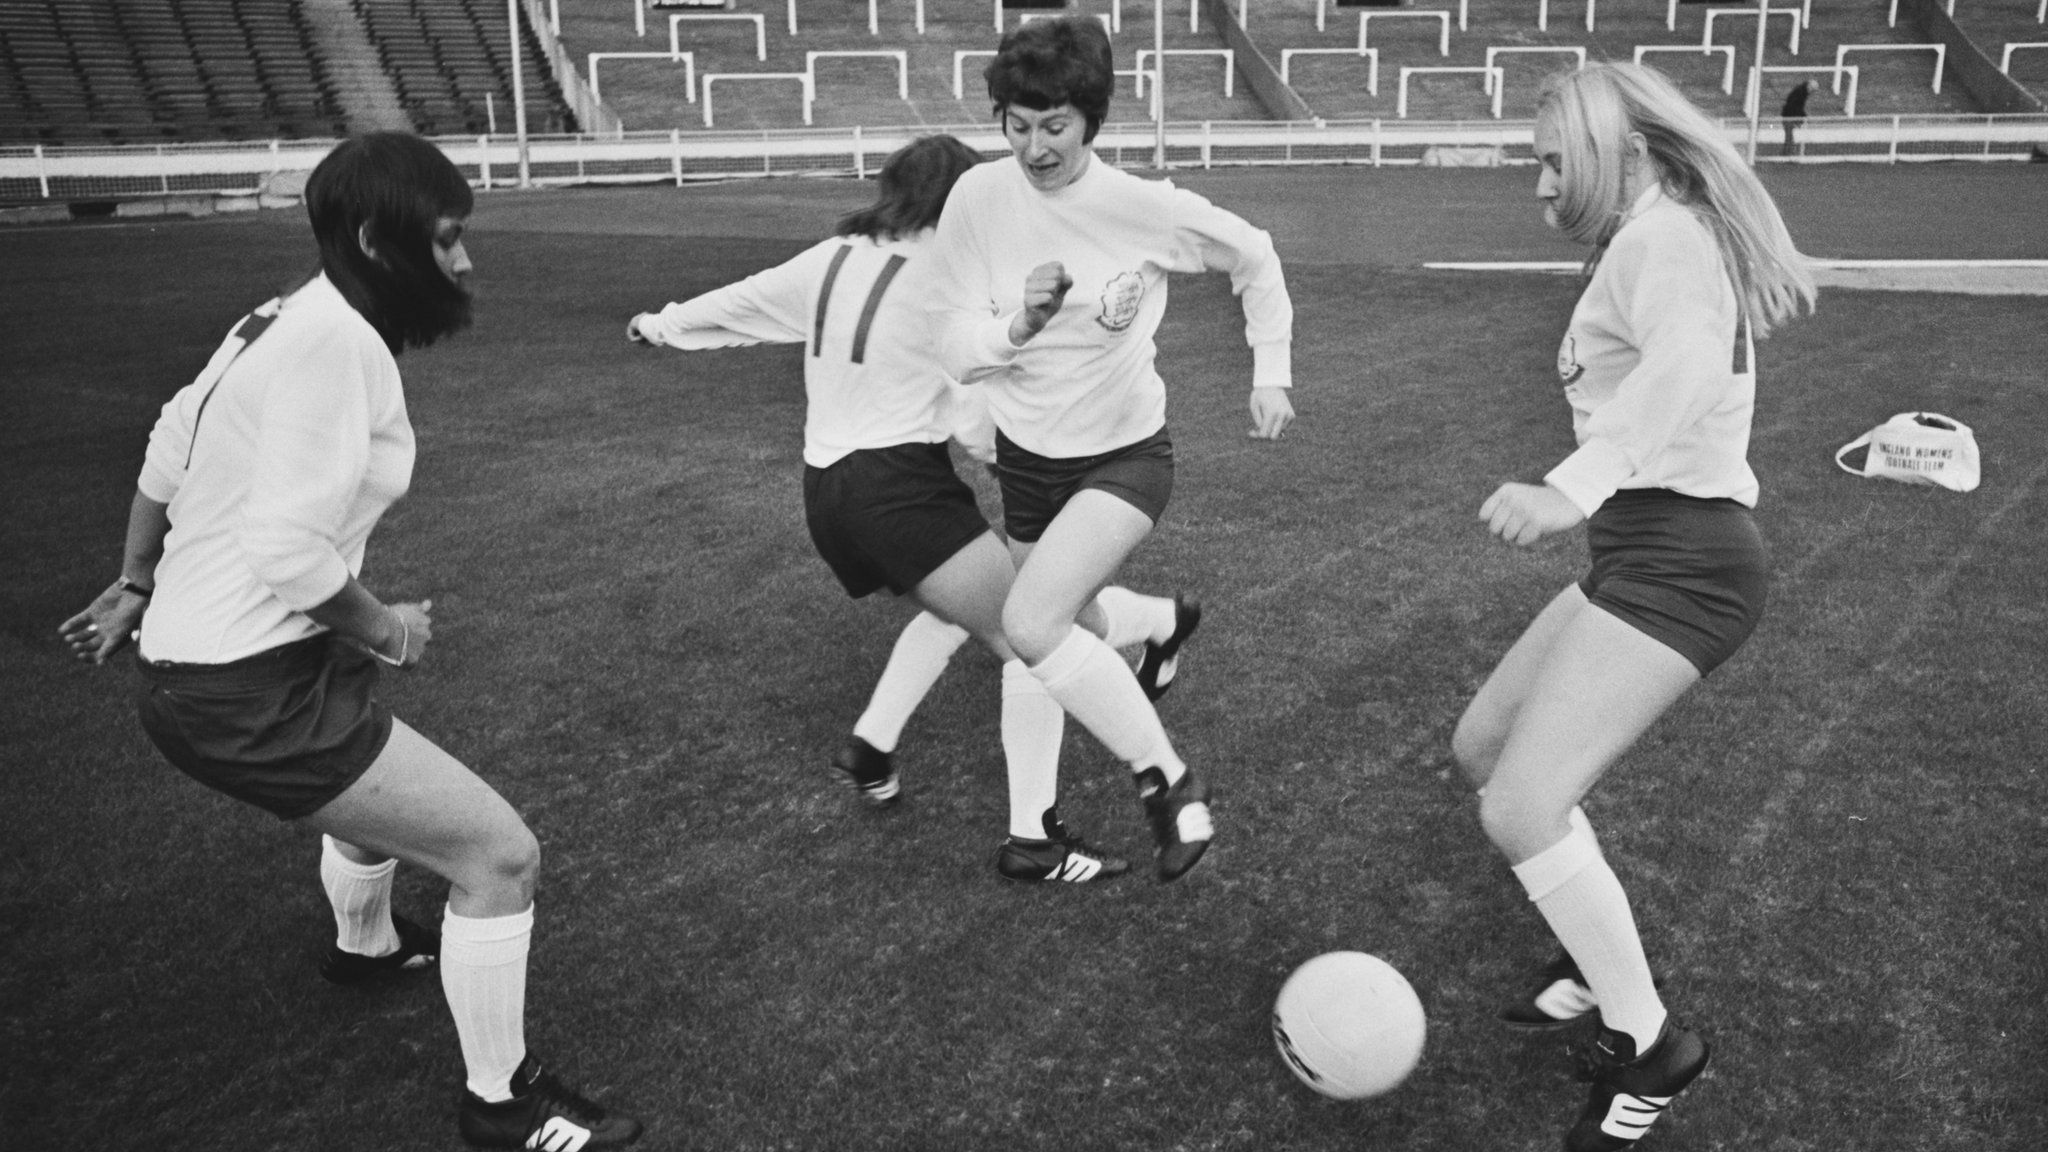 England players training at Wembley before their match in Scotland in 1972